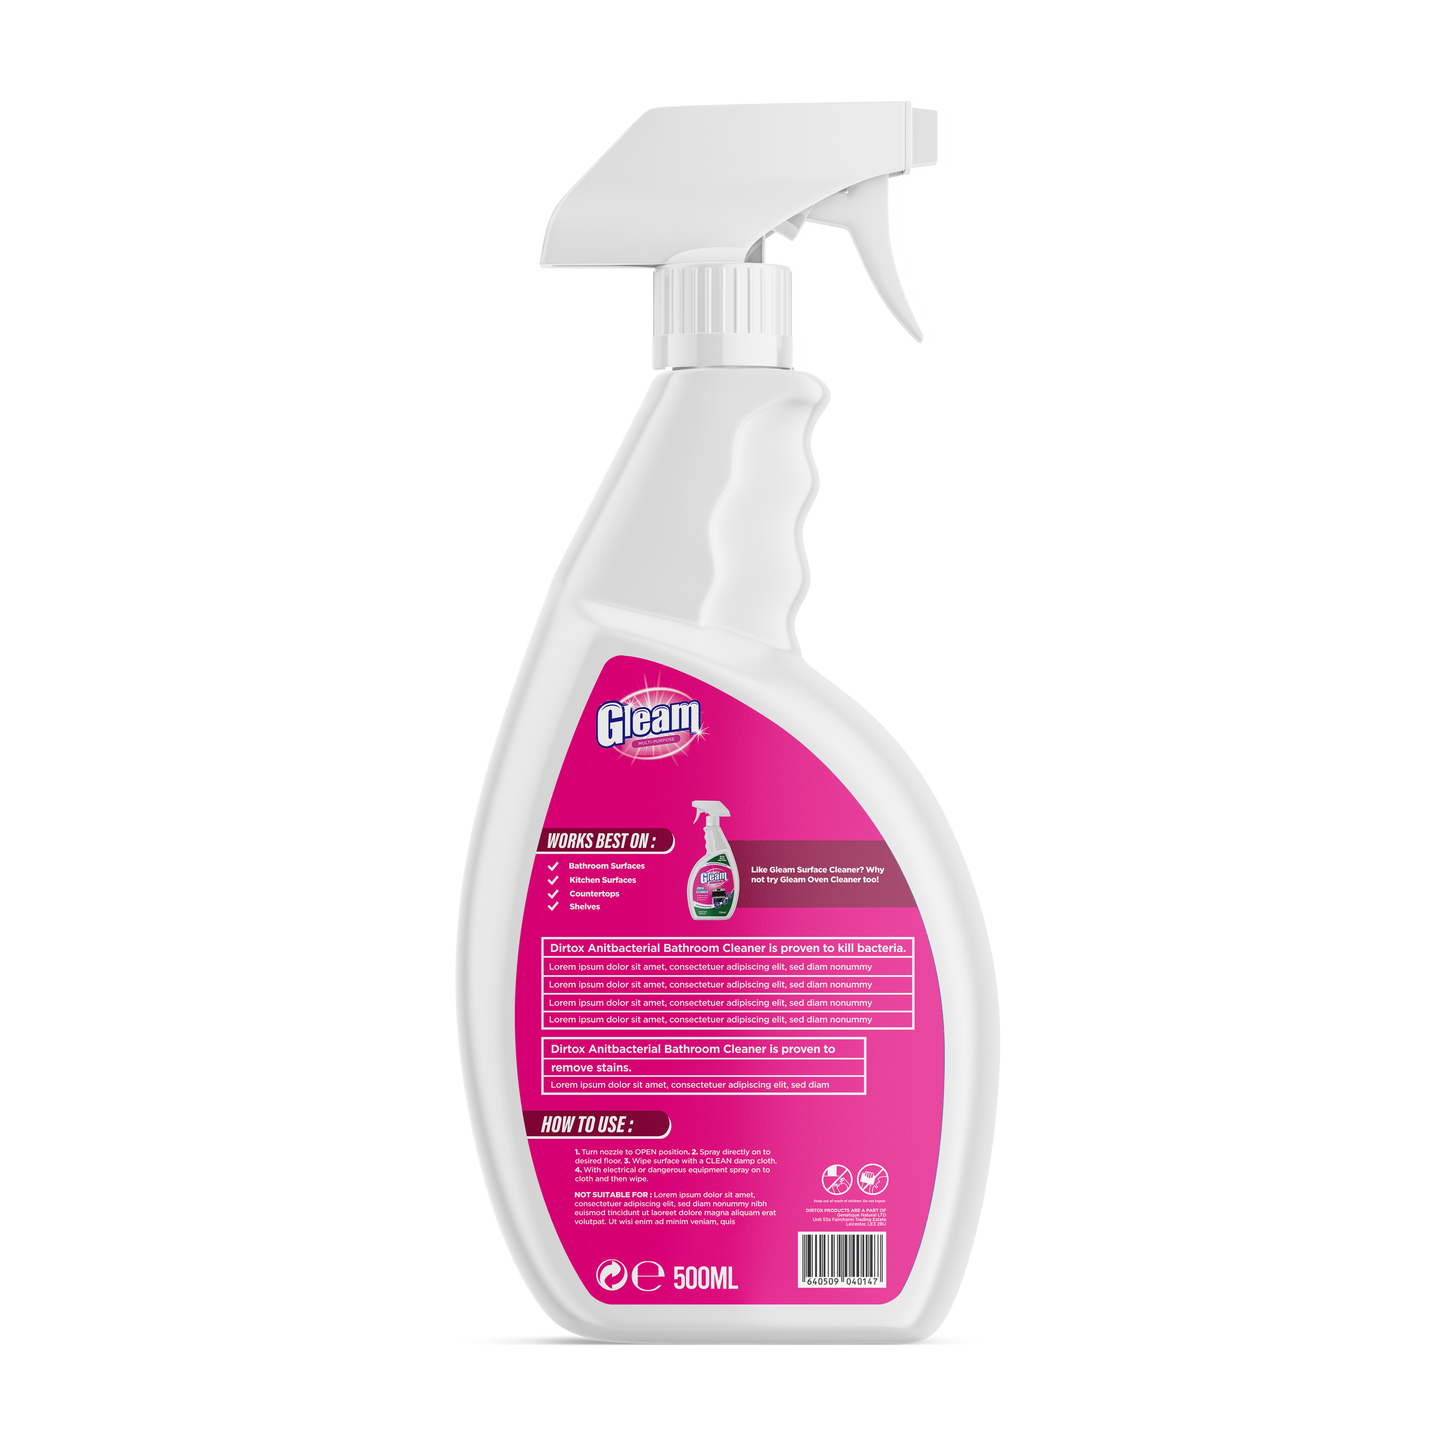 Gleam Surface Cleaner - Pack of 12